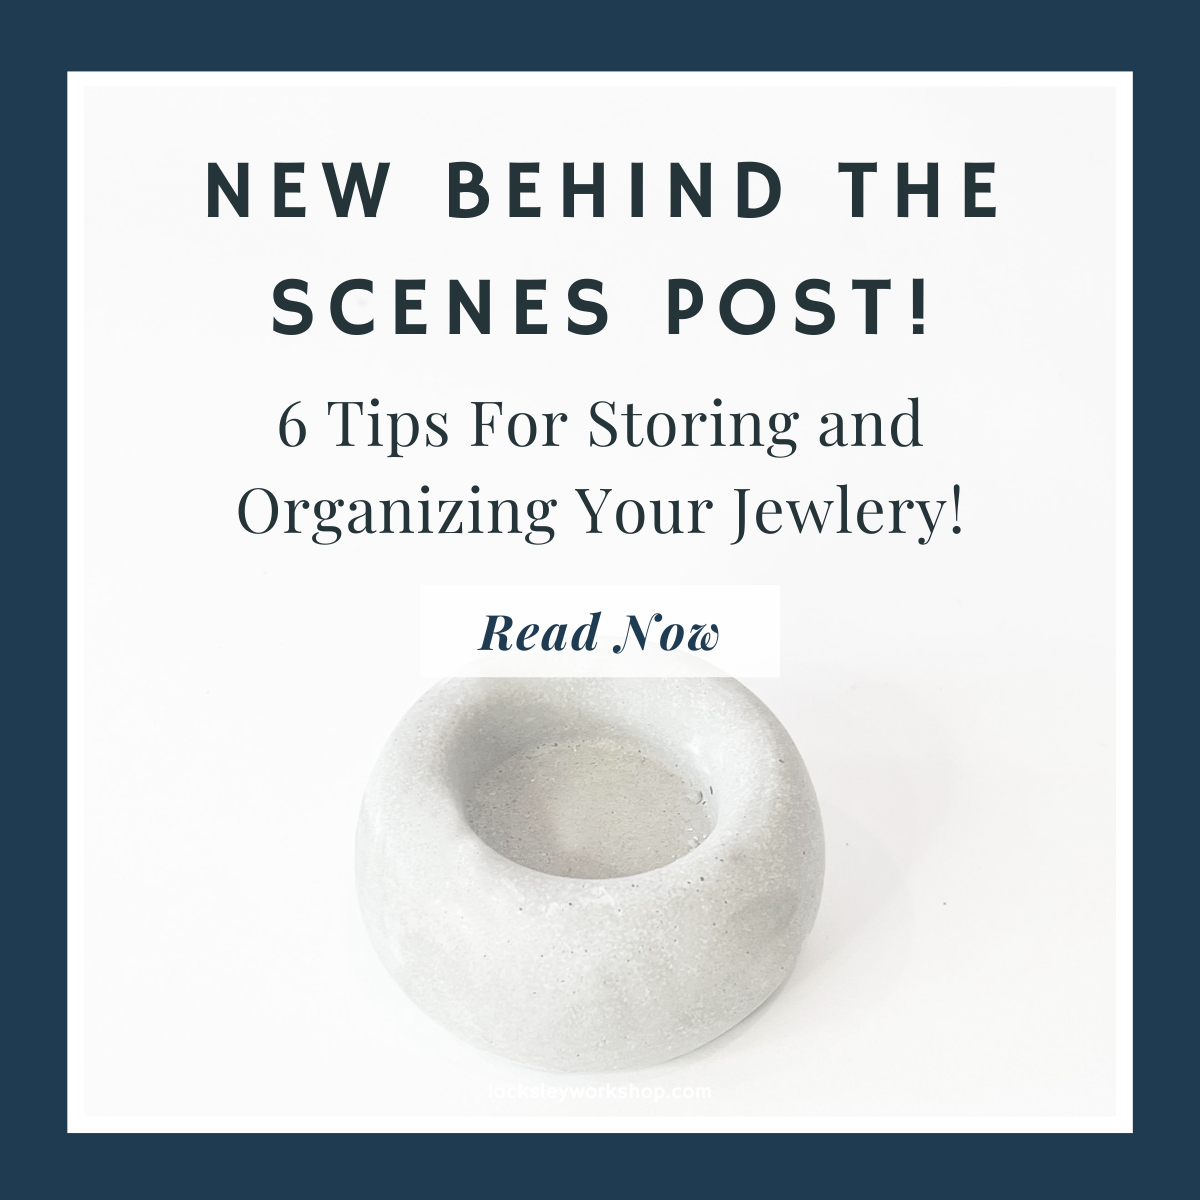 6 Tips For Storing and Organizing Your Jewelry